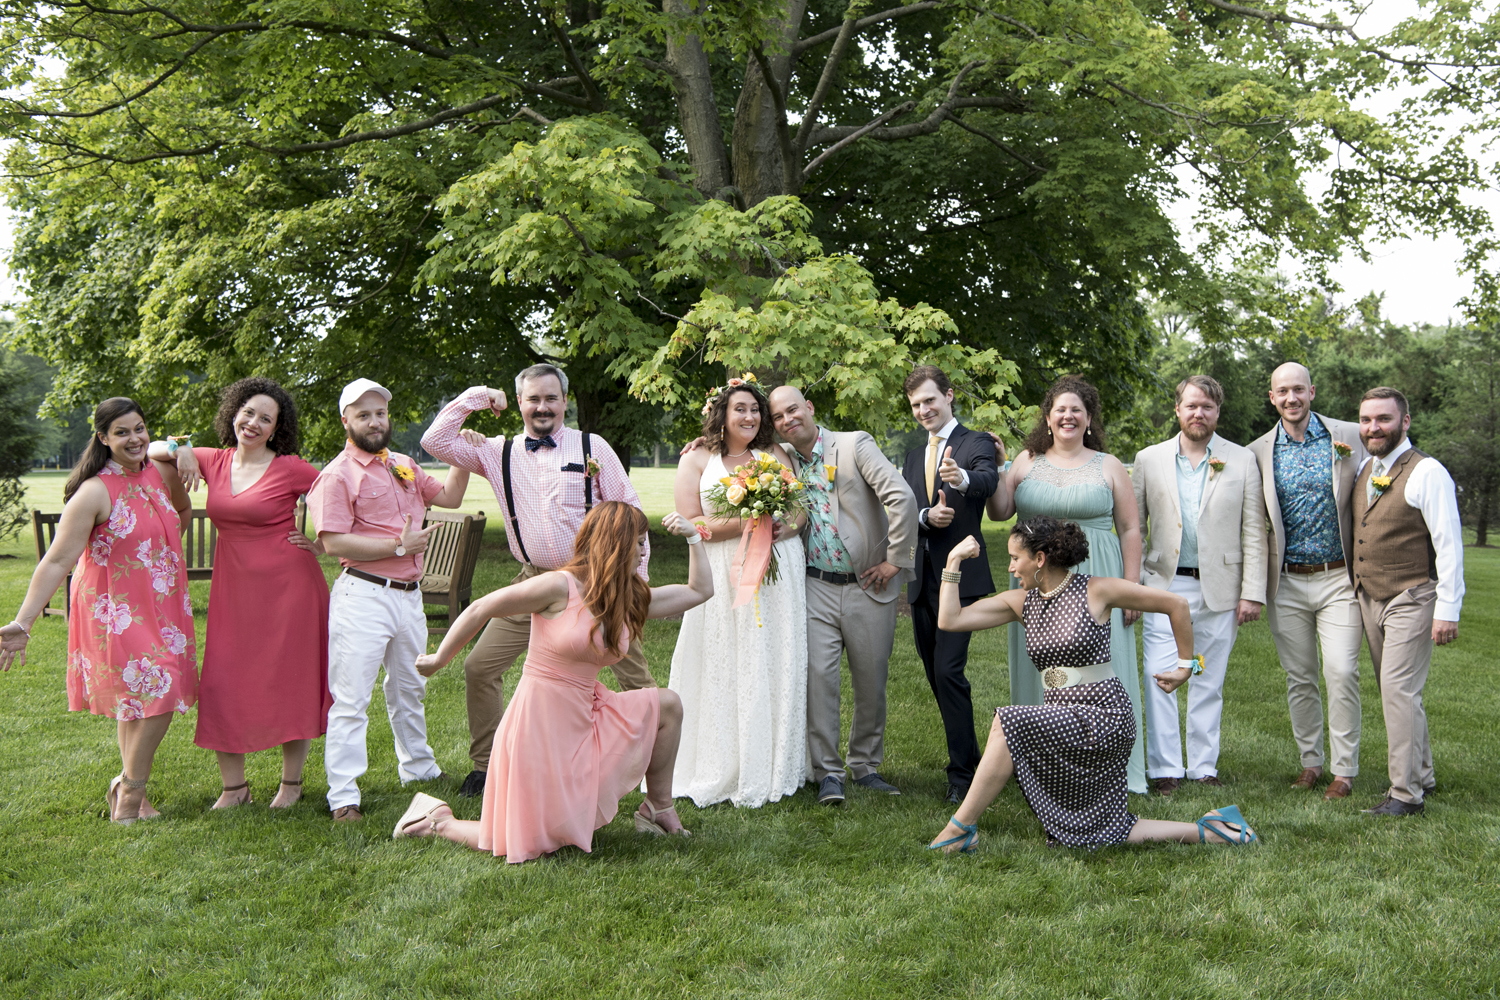 Colorful and creative wedding party in New Jersey. NJ wedding photographer